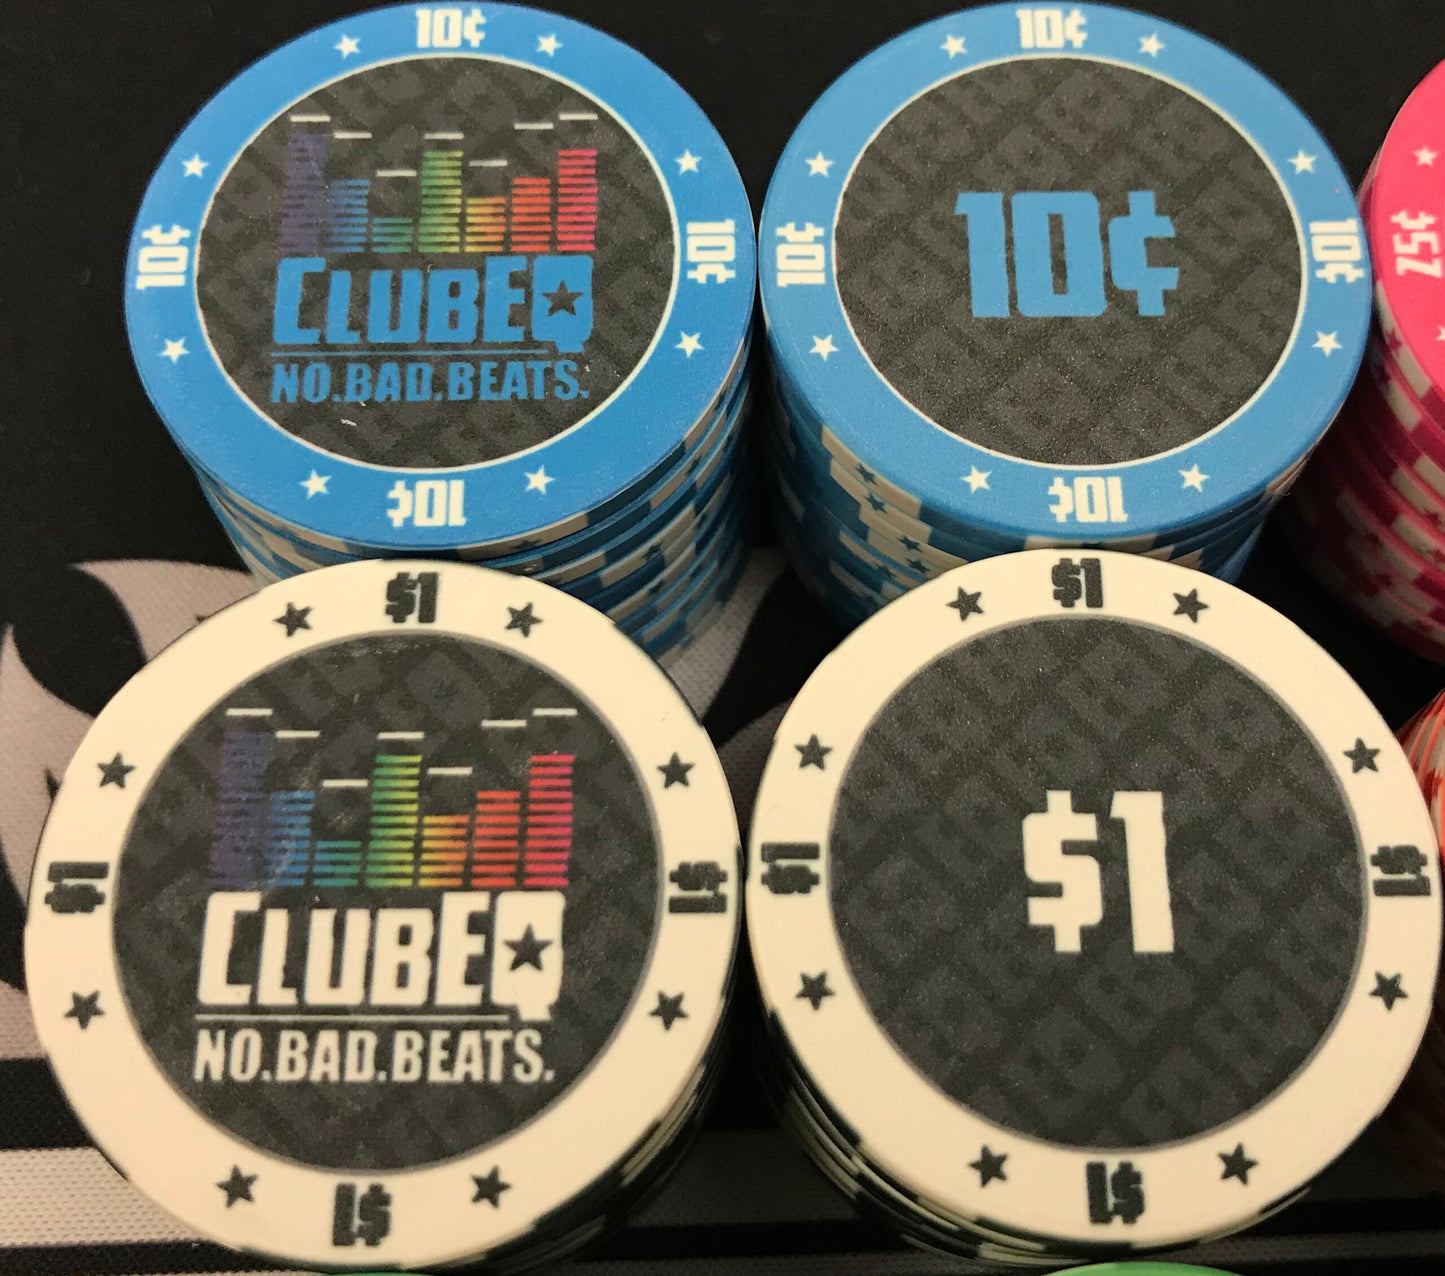 Here we see the ten cent (10¢) and one dollar ($1) ClubEQ poker chips in light blue and white, respectively. The ClubEQ logo resembles a lighted EQ band. On the other side of each chip is the denomination in the same color as the poker chip.